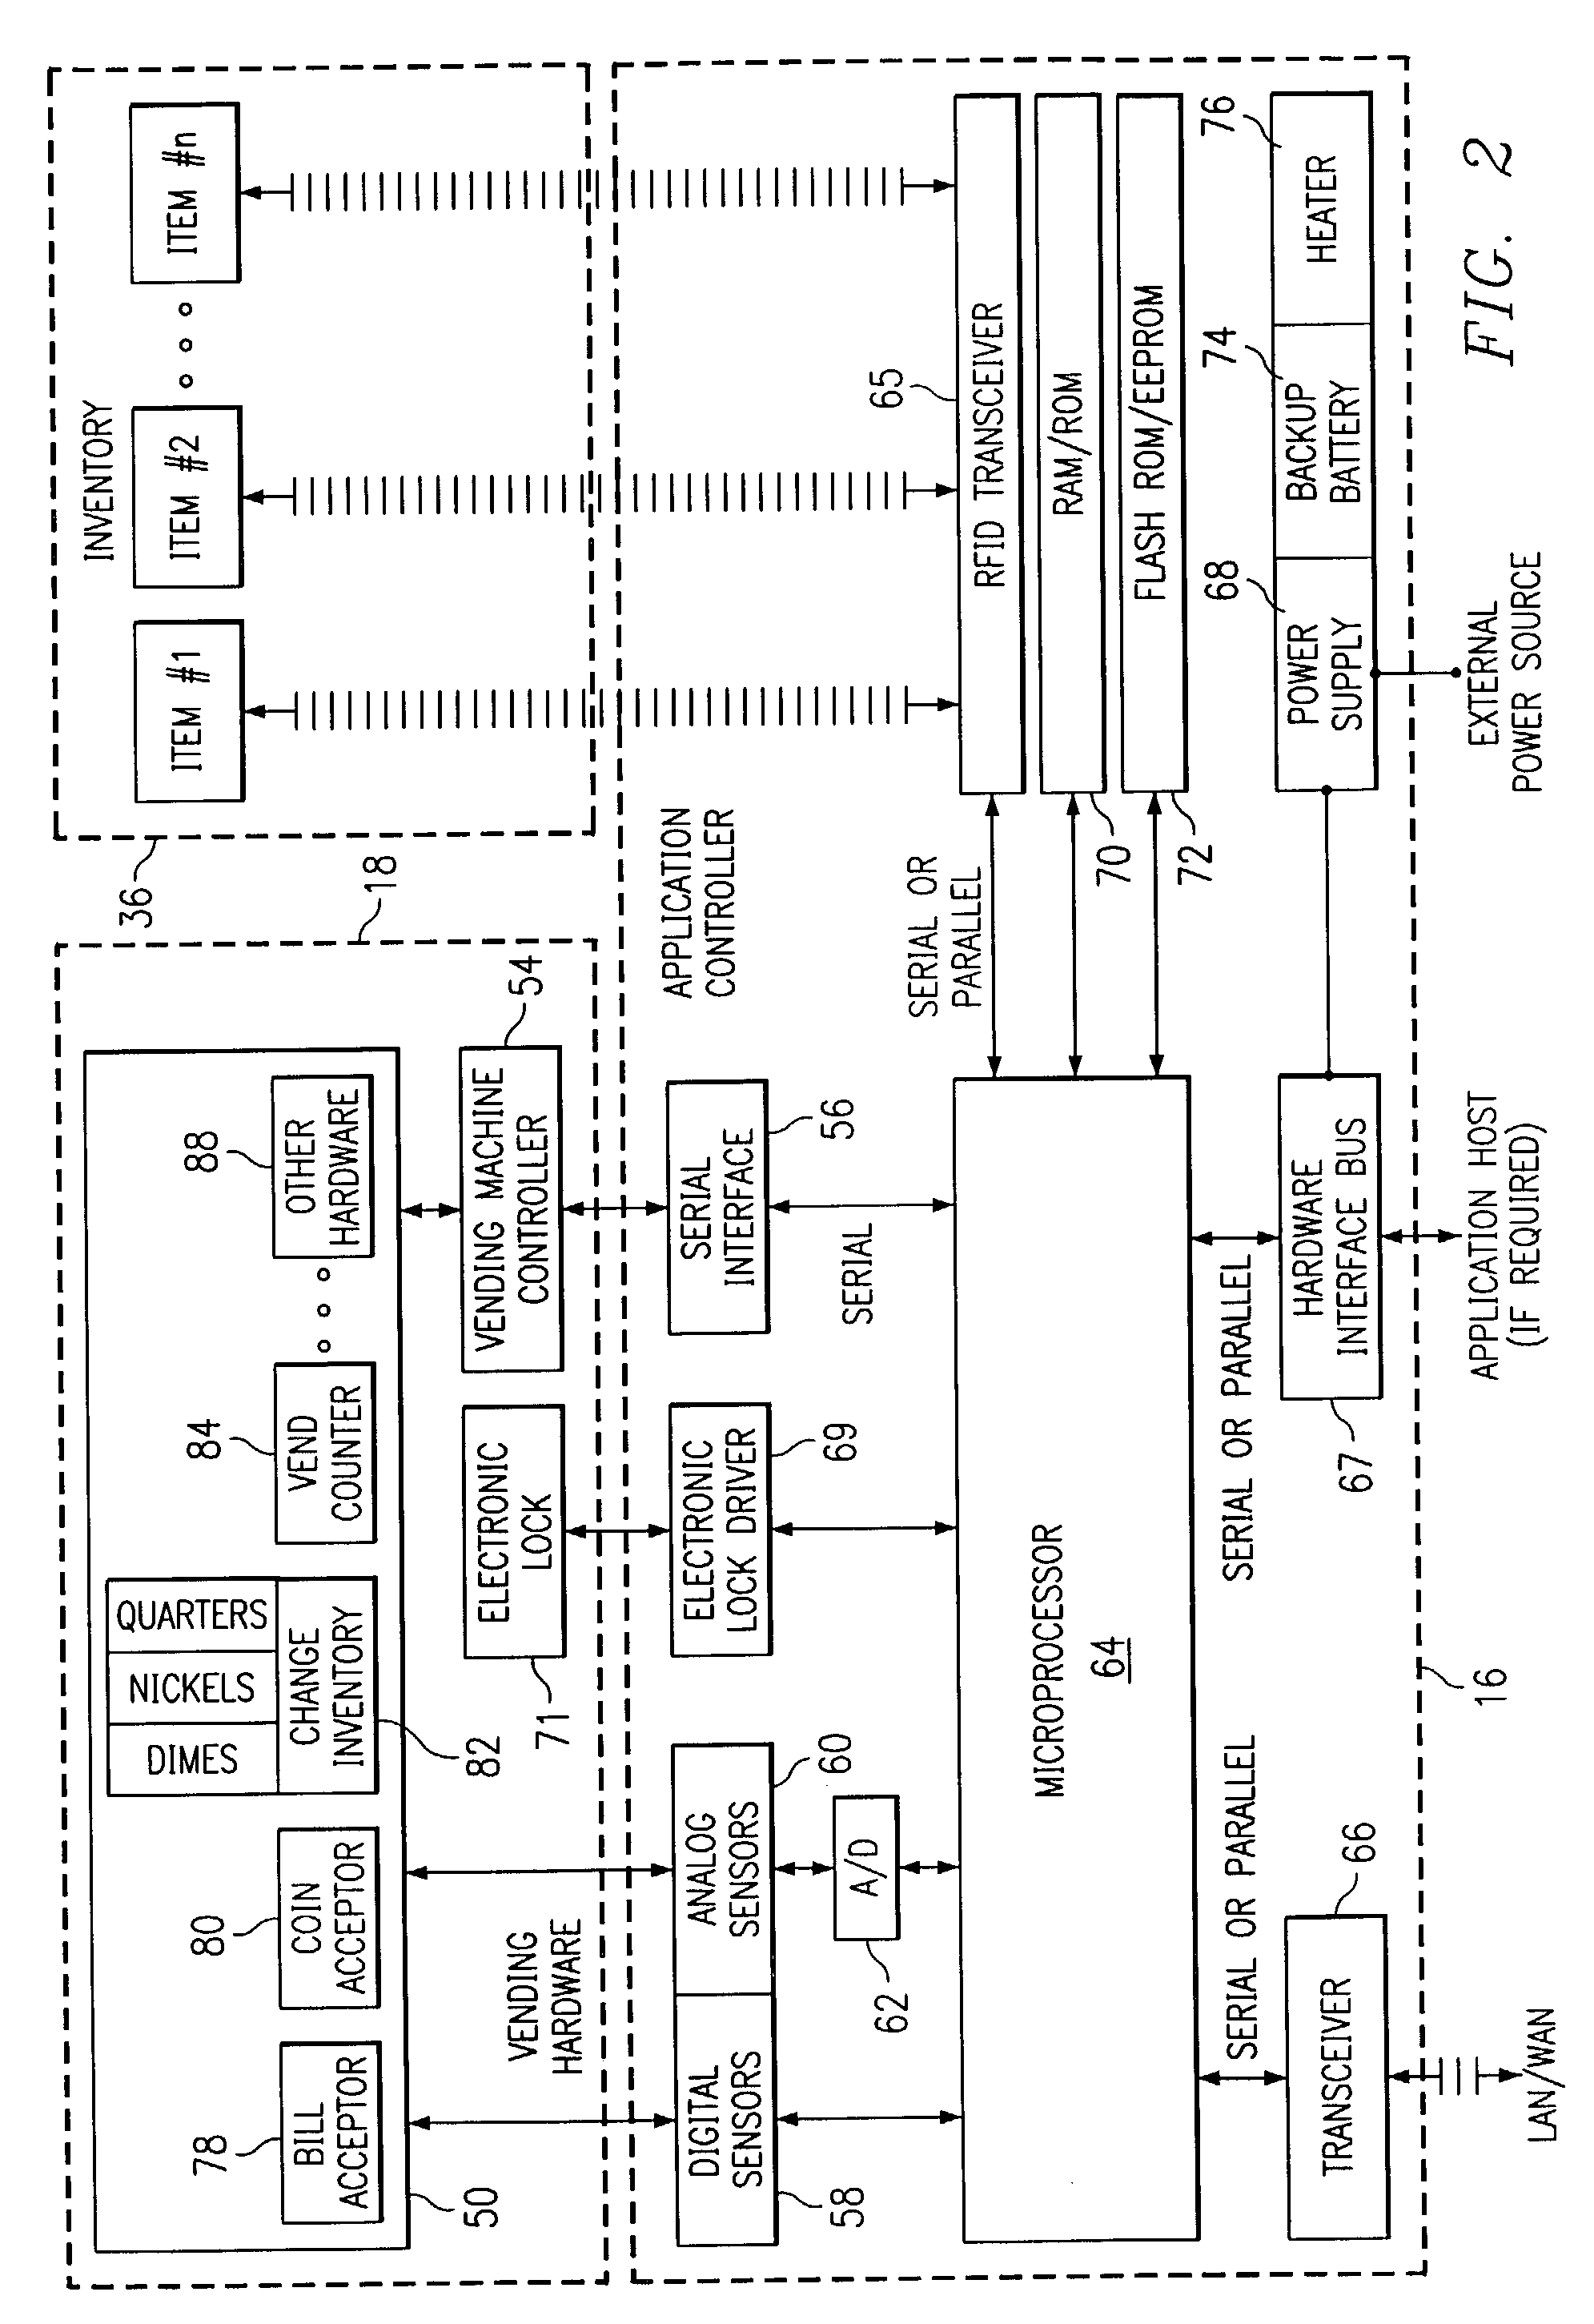 Method and system for predicting the services needs of remote point of sale devices